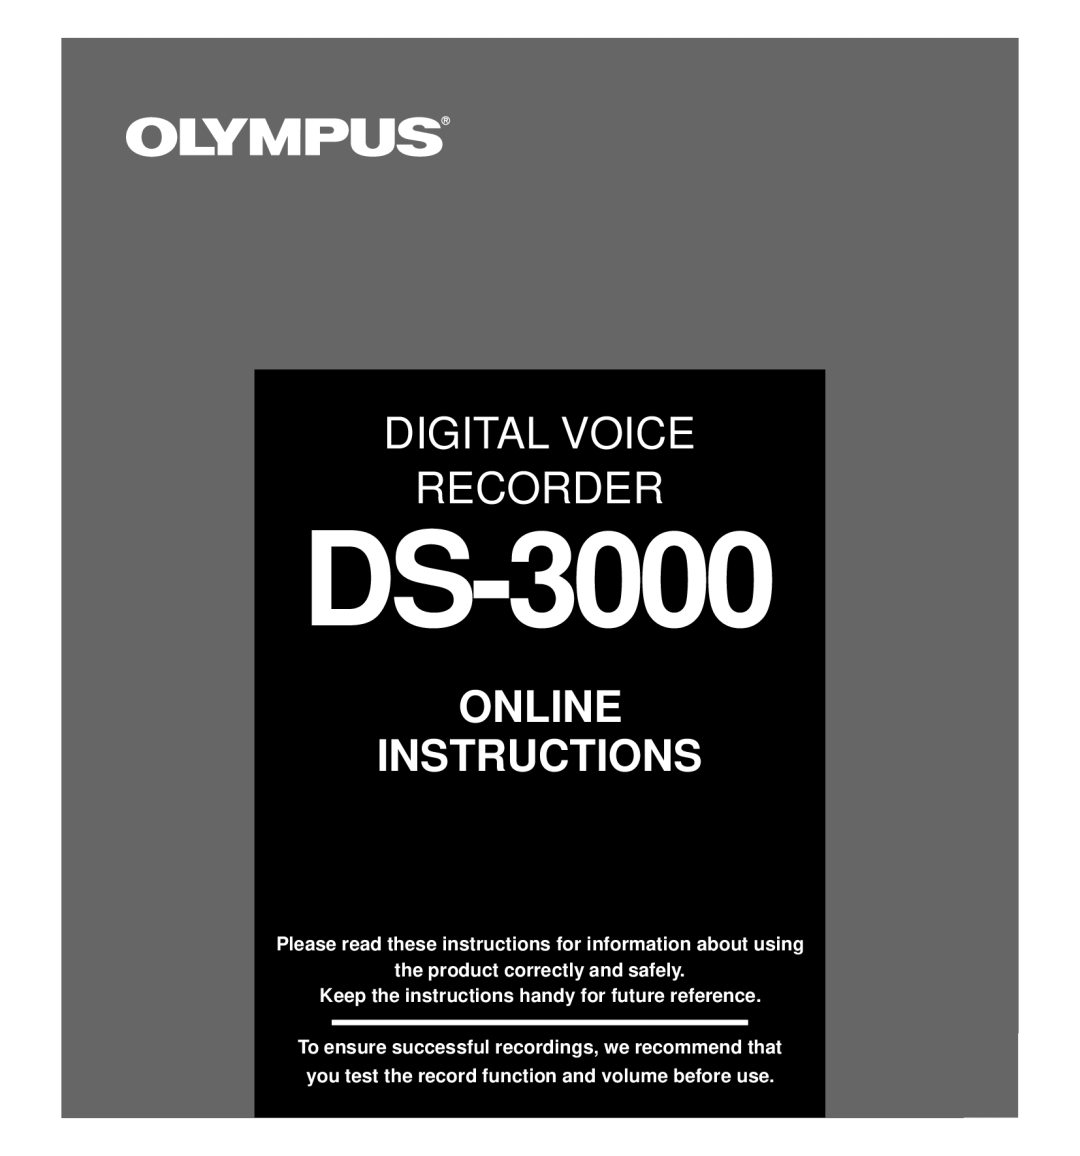 Olympus DS-3000 manual Digital Voice Recorder, Online Instructions, the product correctly and safely 